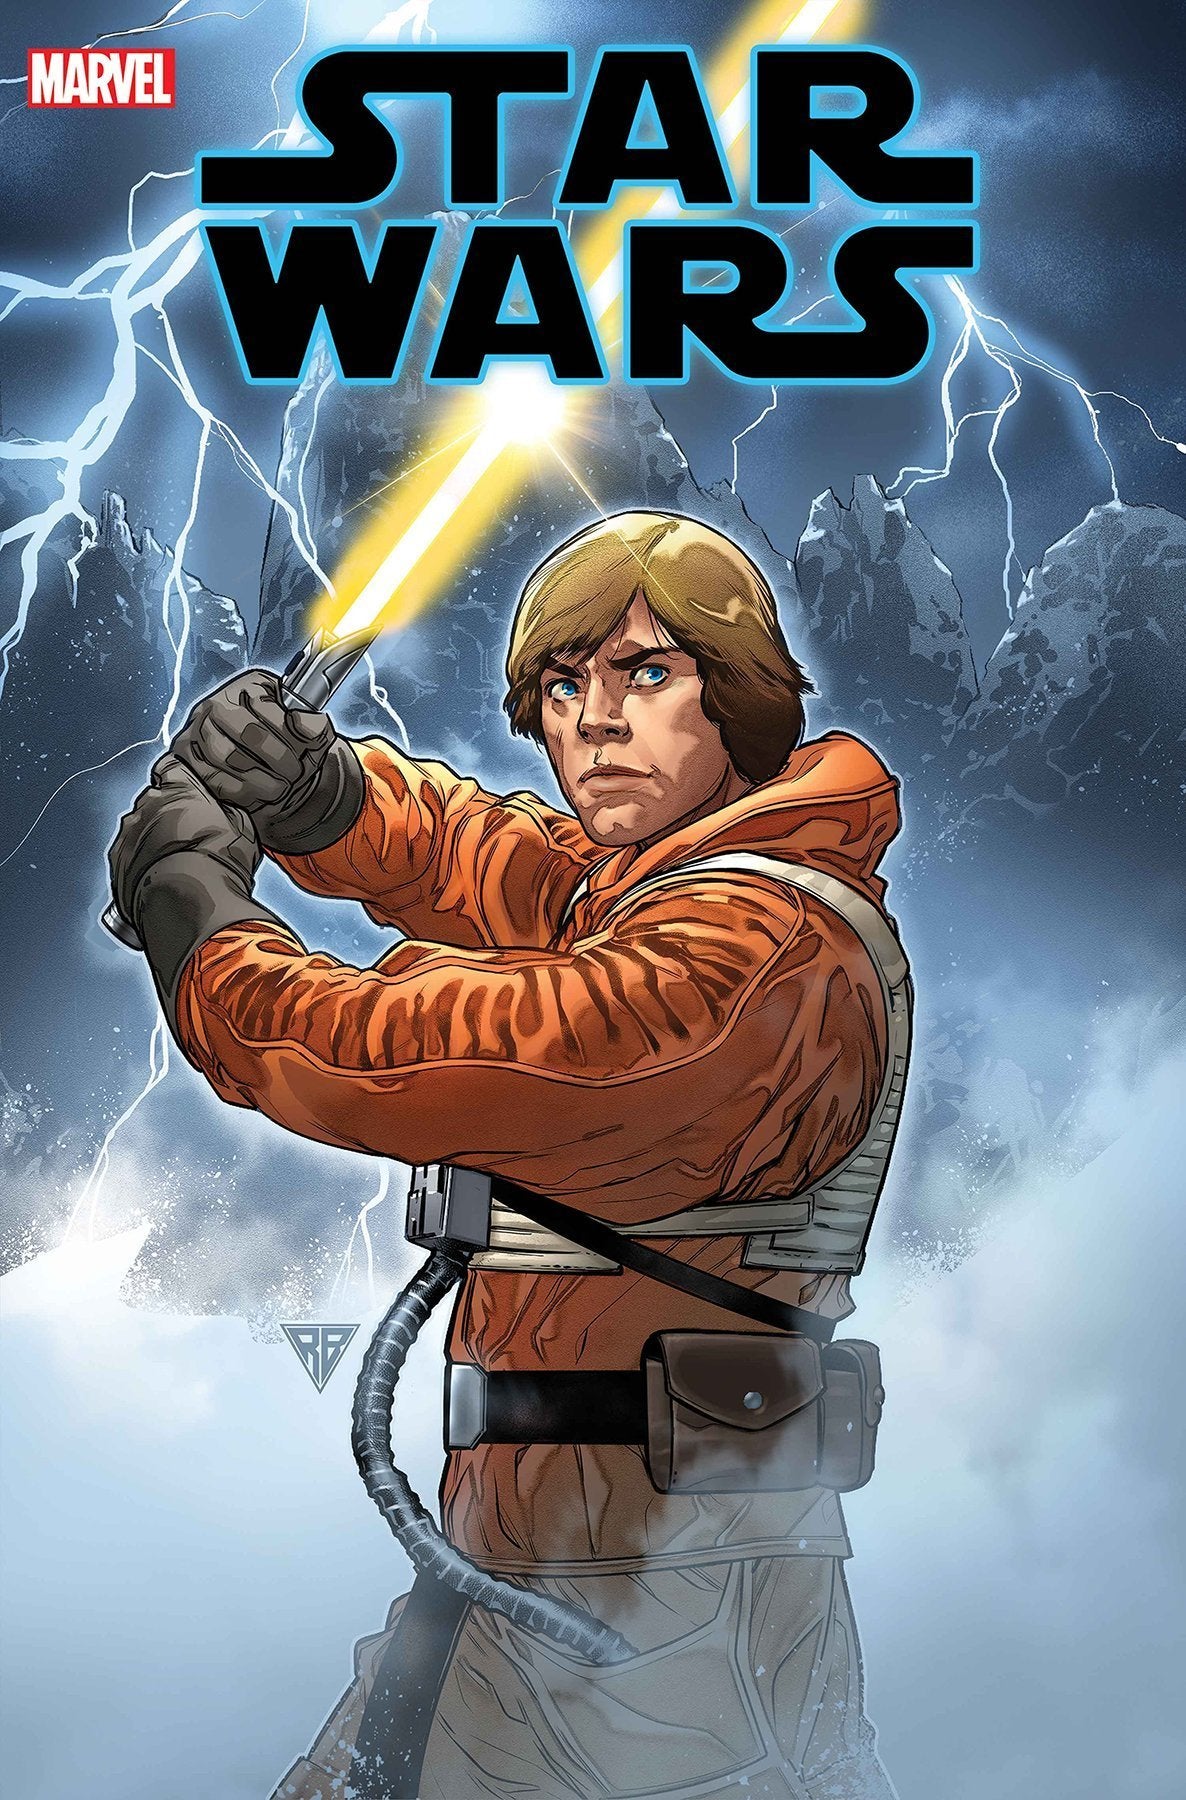 Star Wars #6 (09/16/2020) %product_vendow% - The One Stop Shop Comics & Games